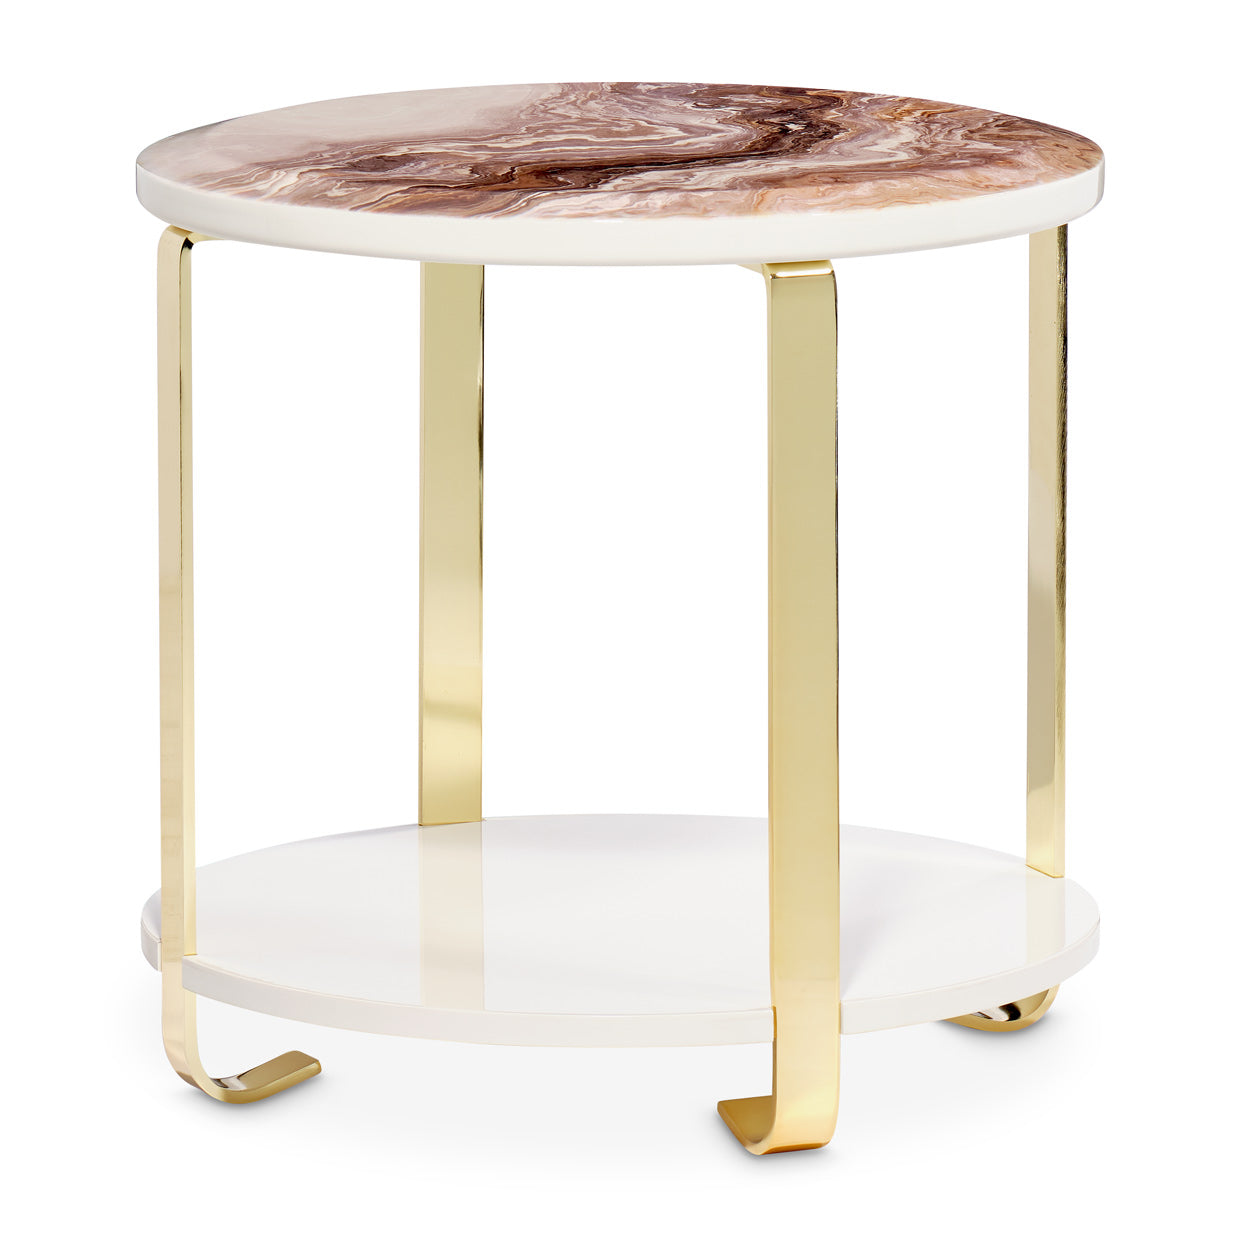 Ariana End Table, Sofa and loveseat, Sophistication, Slender gold legs, Faux marble top, Chic style, Bottom shelf, Functionality, Panache, Convenience, dream art, Michael amini, end table , table , 